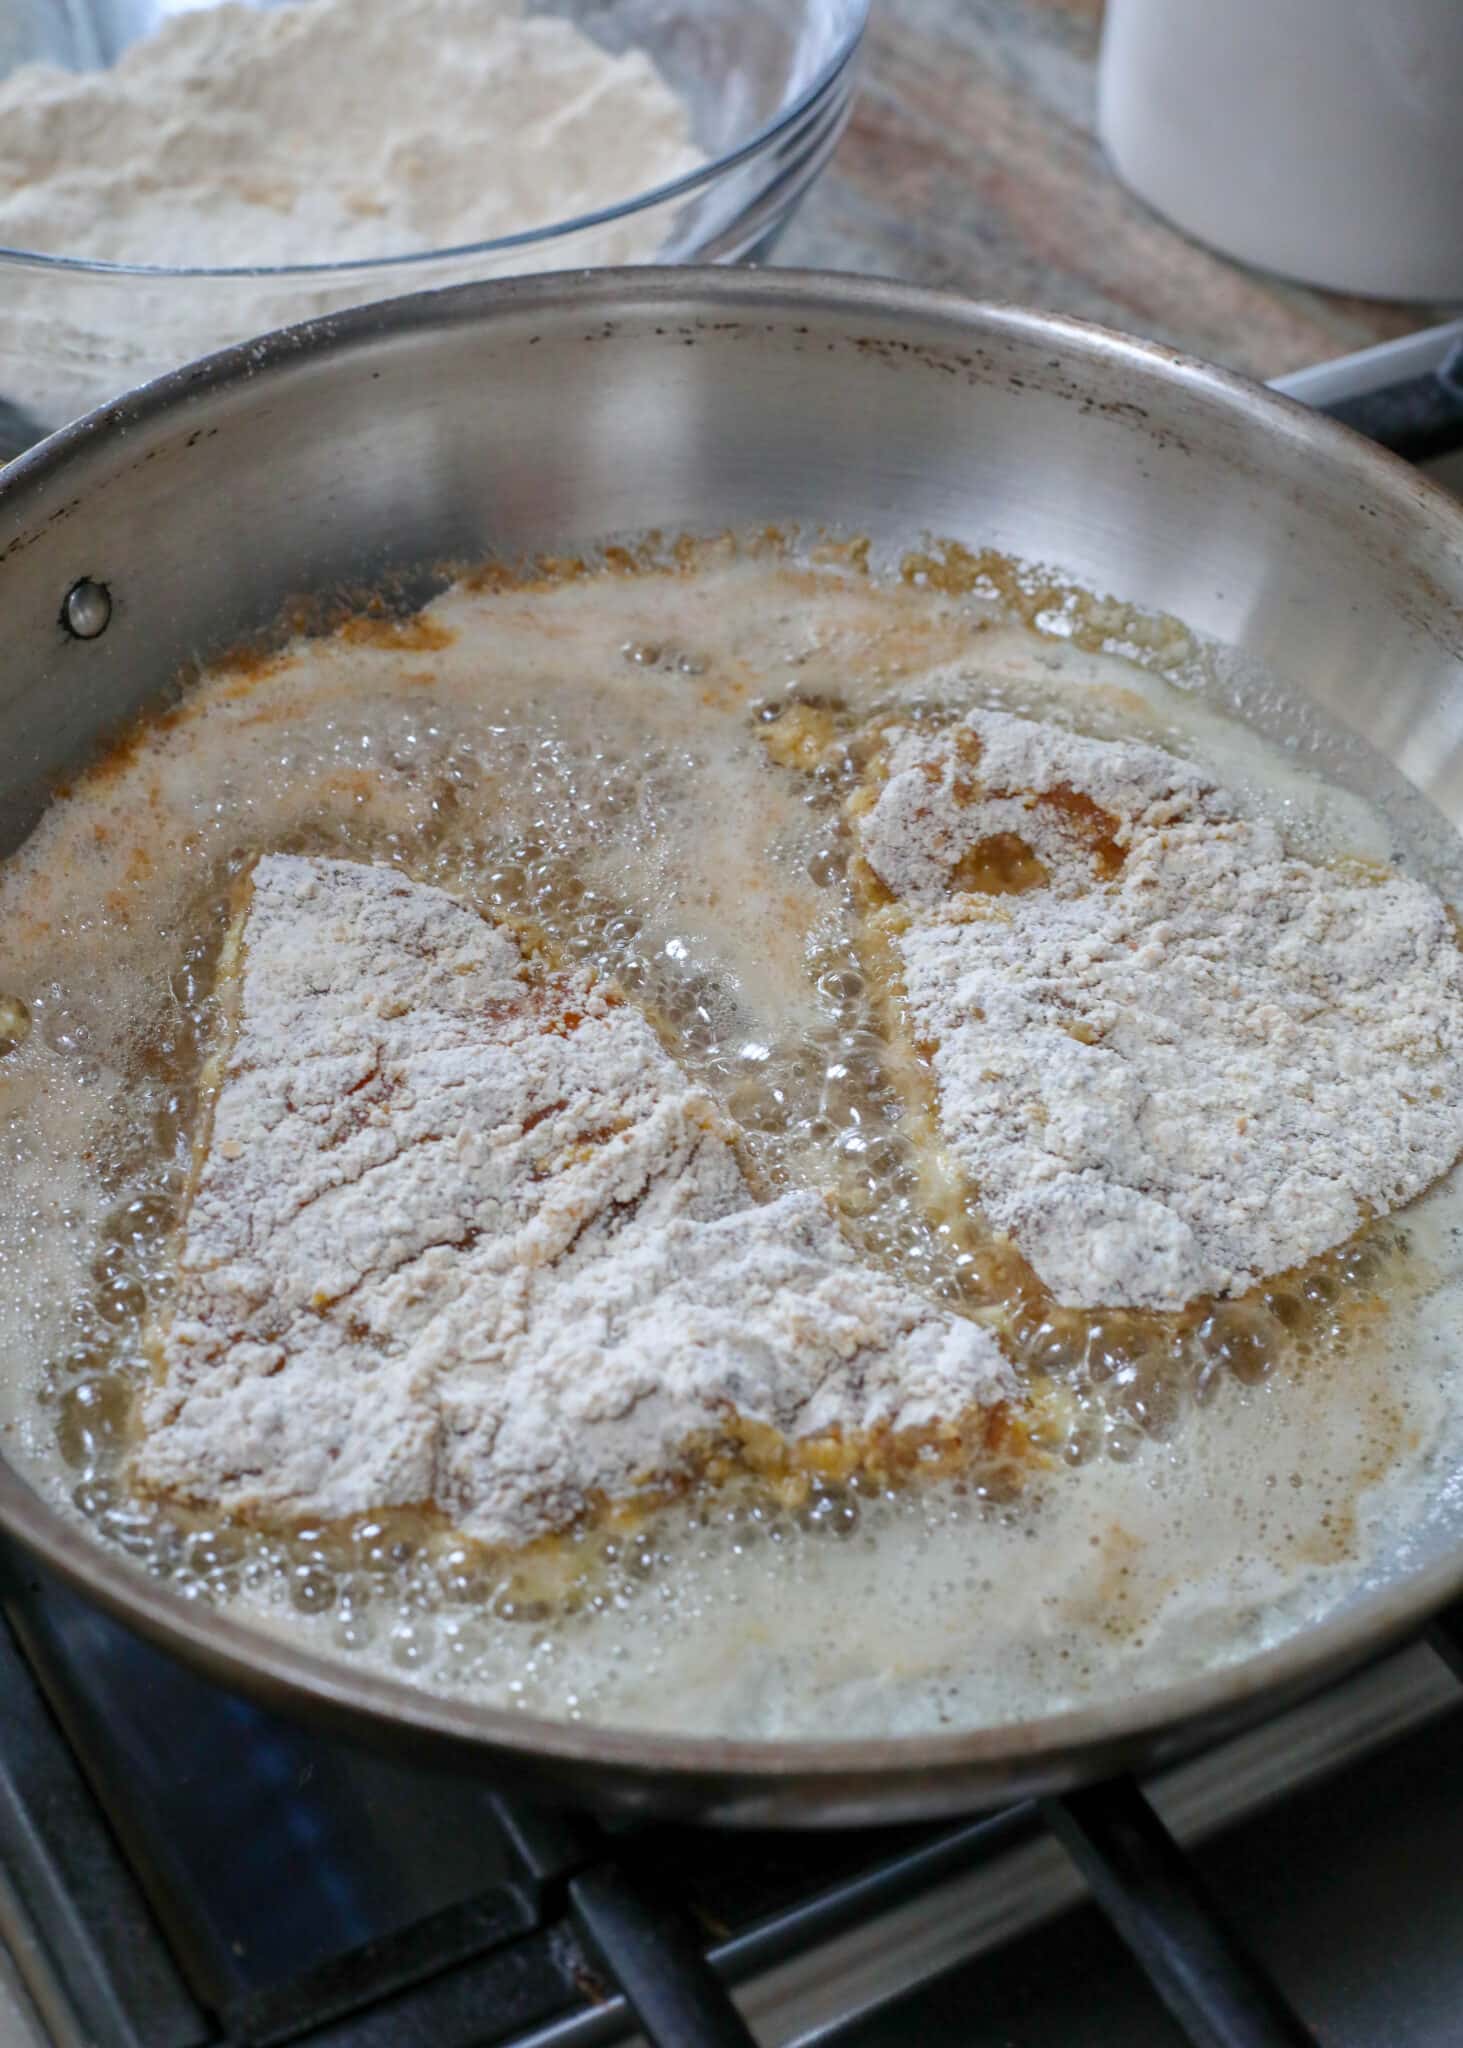 Brown well on each side before flipping the chicken over - recipe for Twisted Chicken Piccata